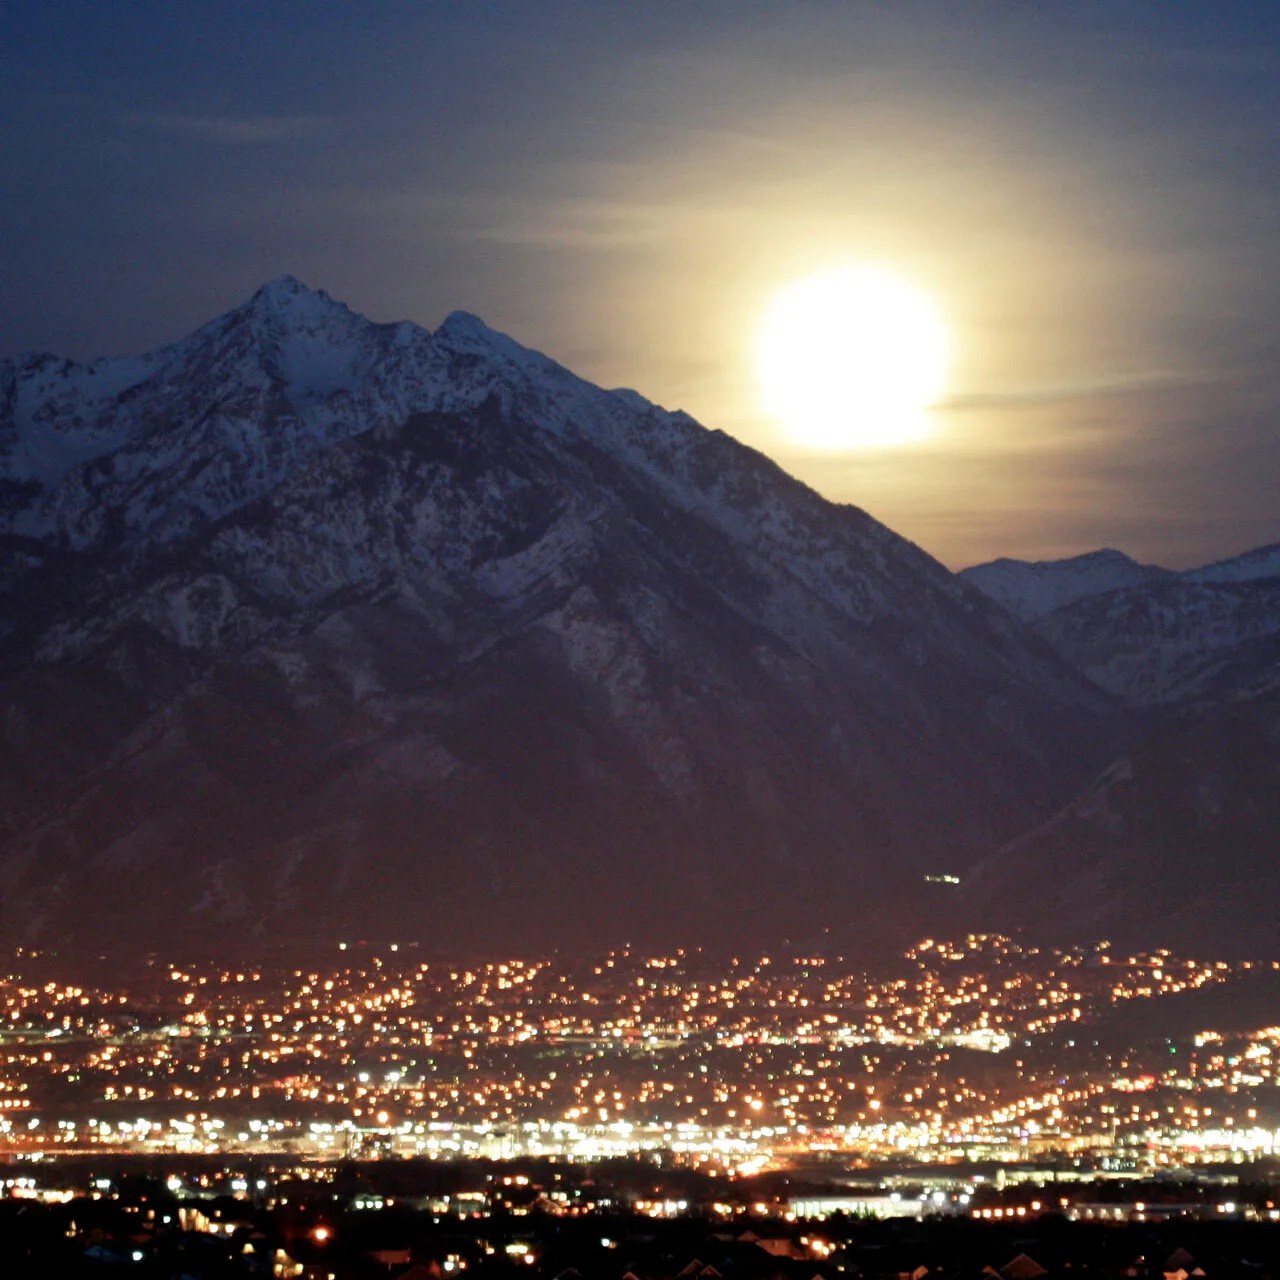 Bright moon rising over mountains with city lights in the foreground.